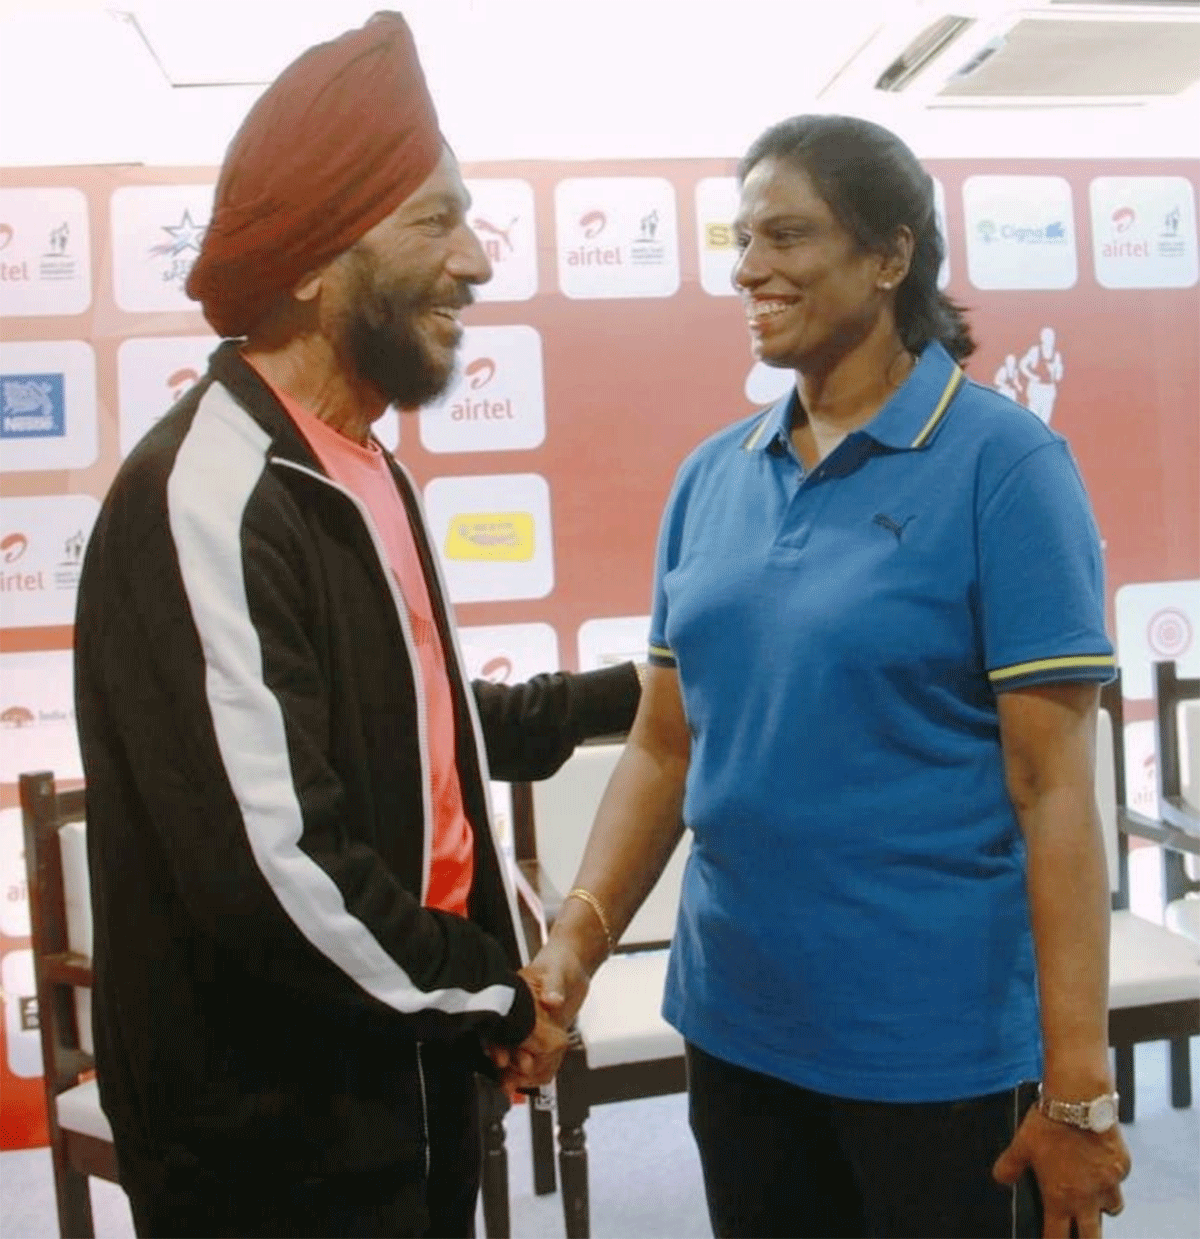 India's track and field legends Milkha Singh and PT Usha